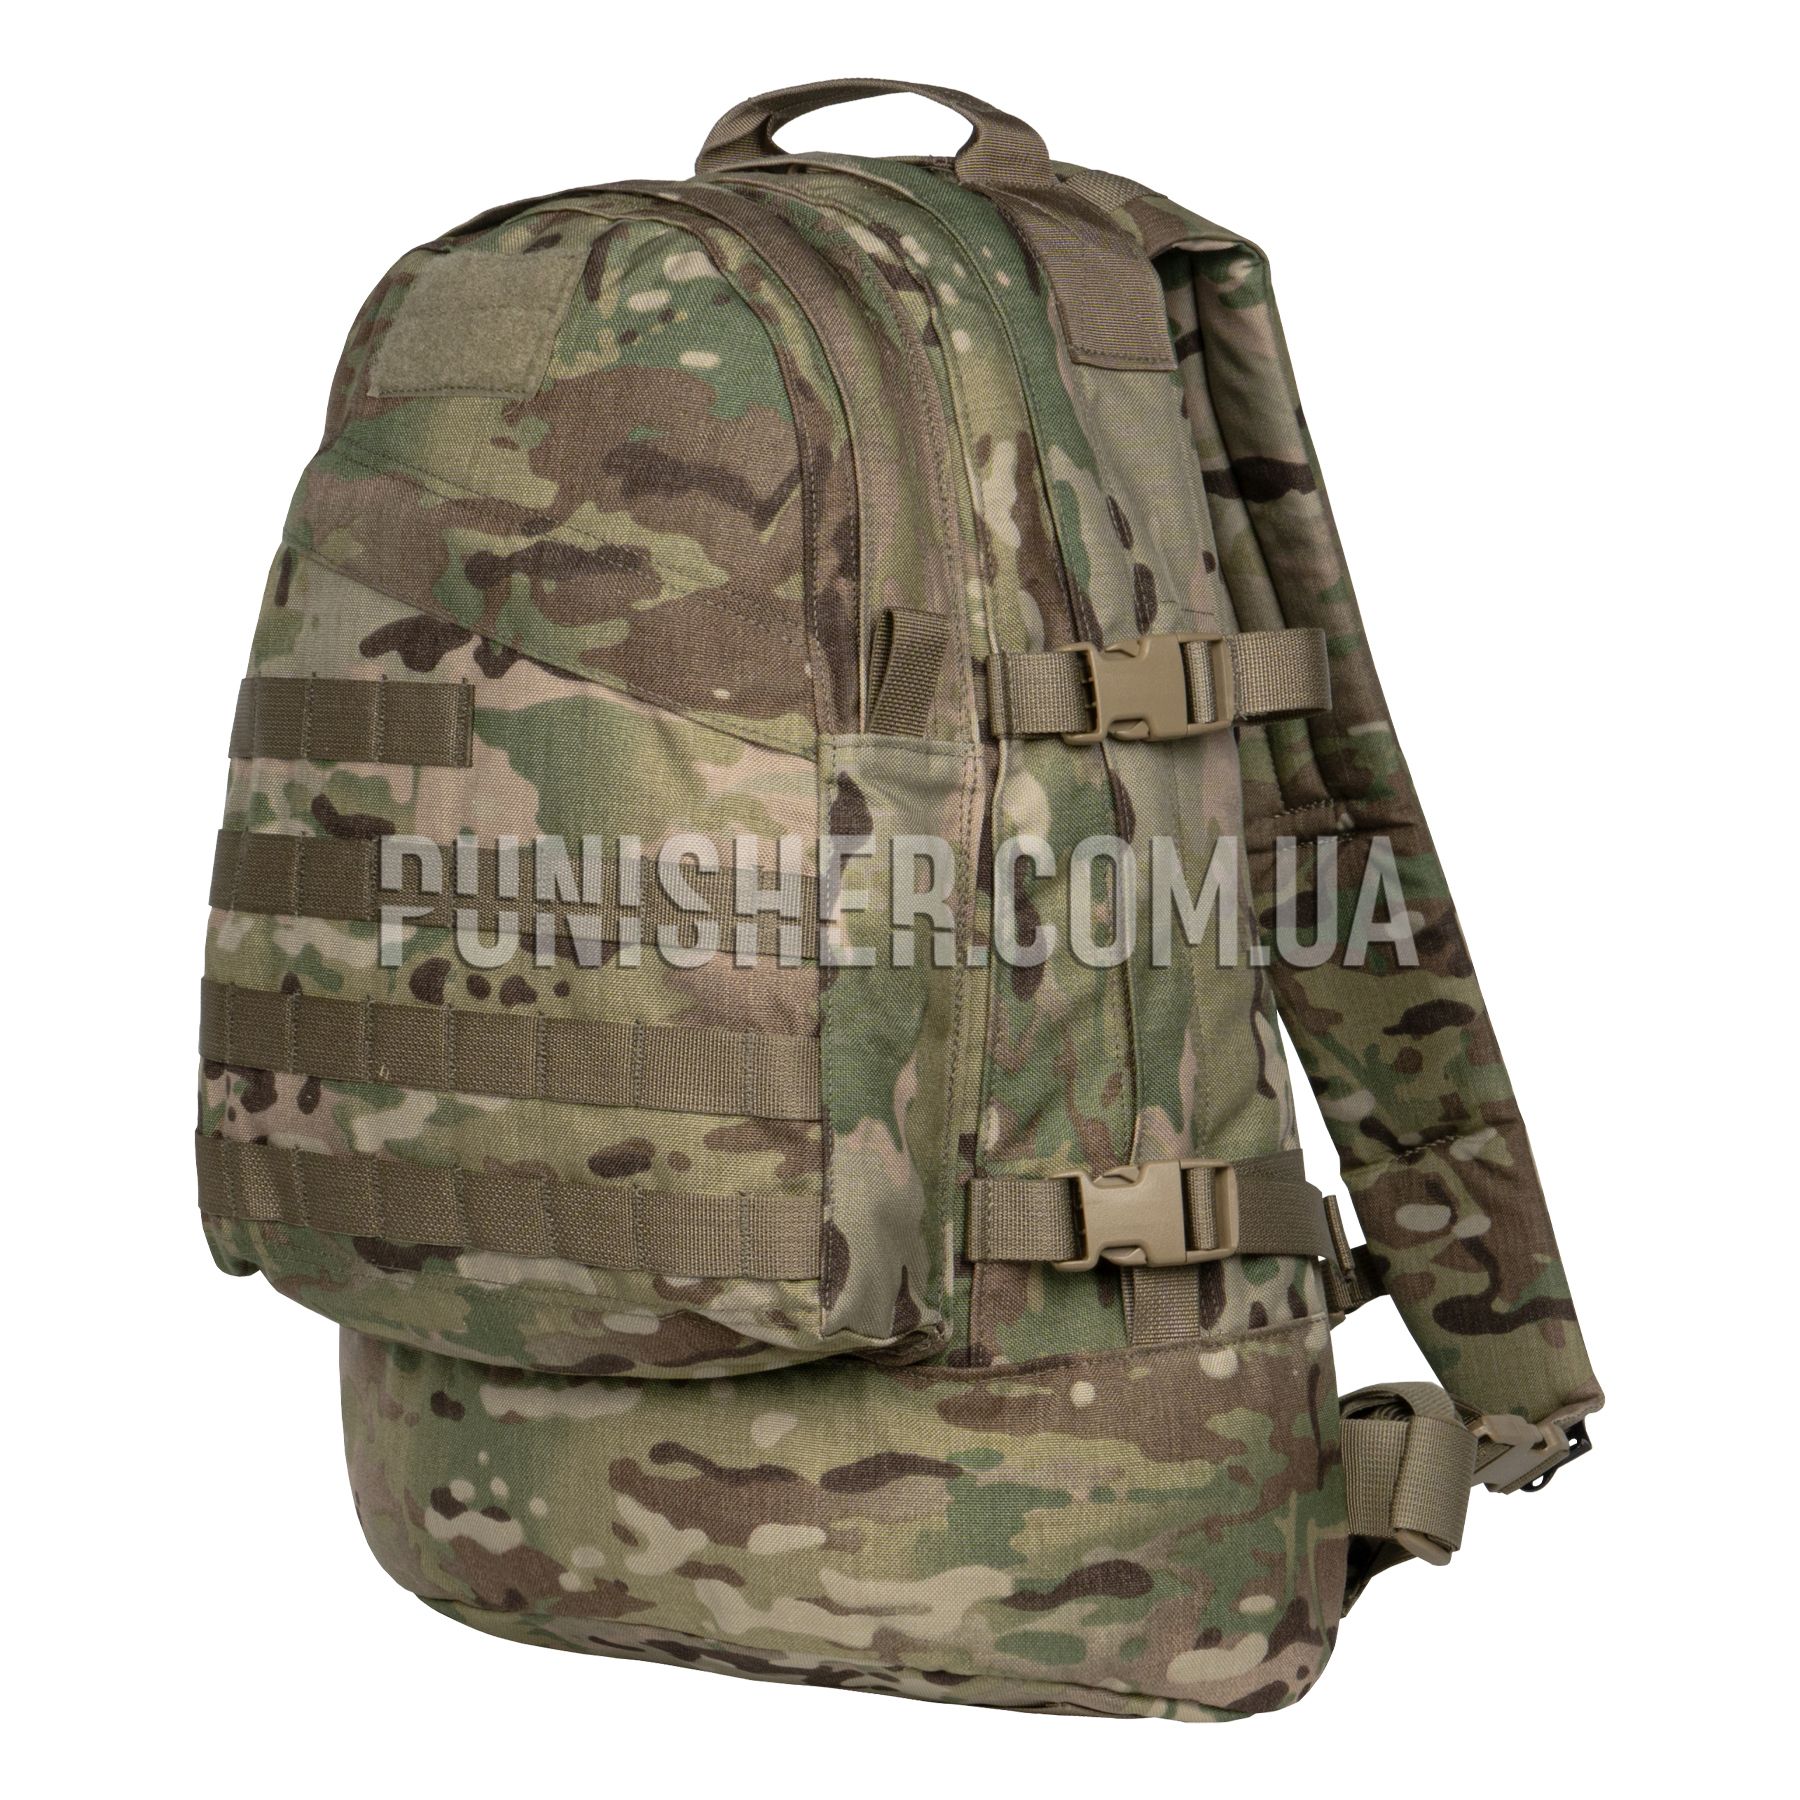 LBT-1476A 30L 3Day Pack Multicam buy with international delivery